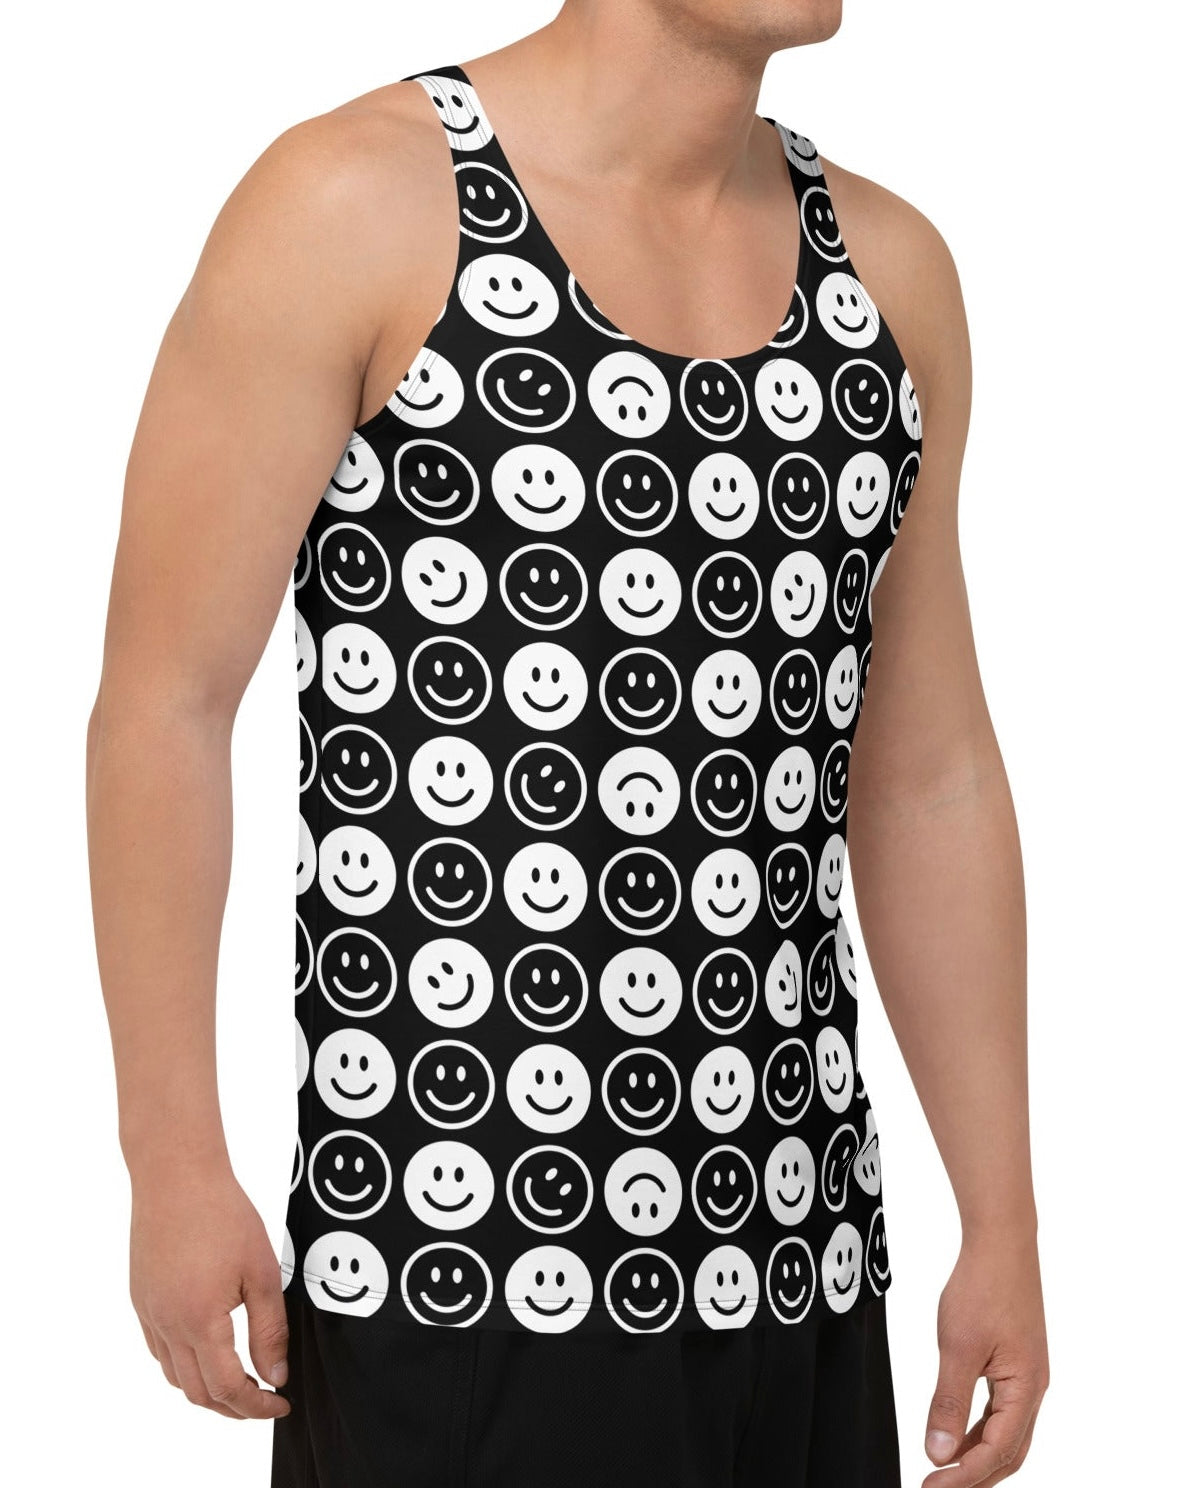 All Smiles Tank Top, Tank Top, - One Stop Rave